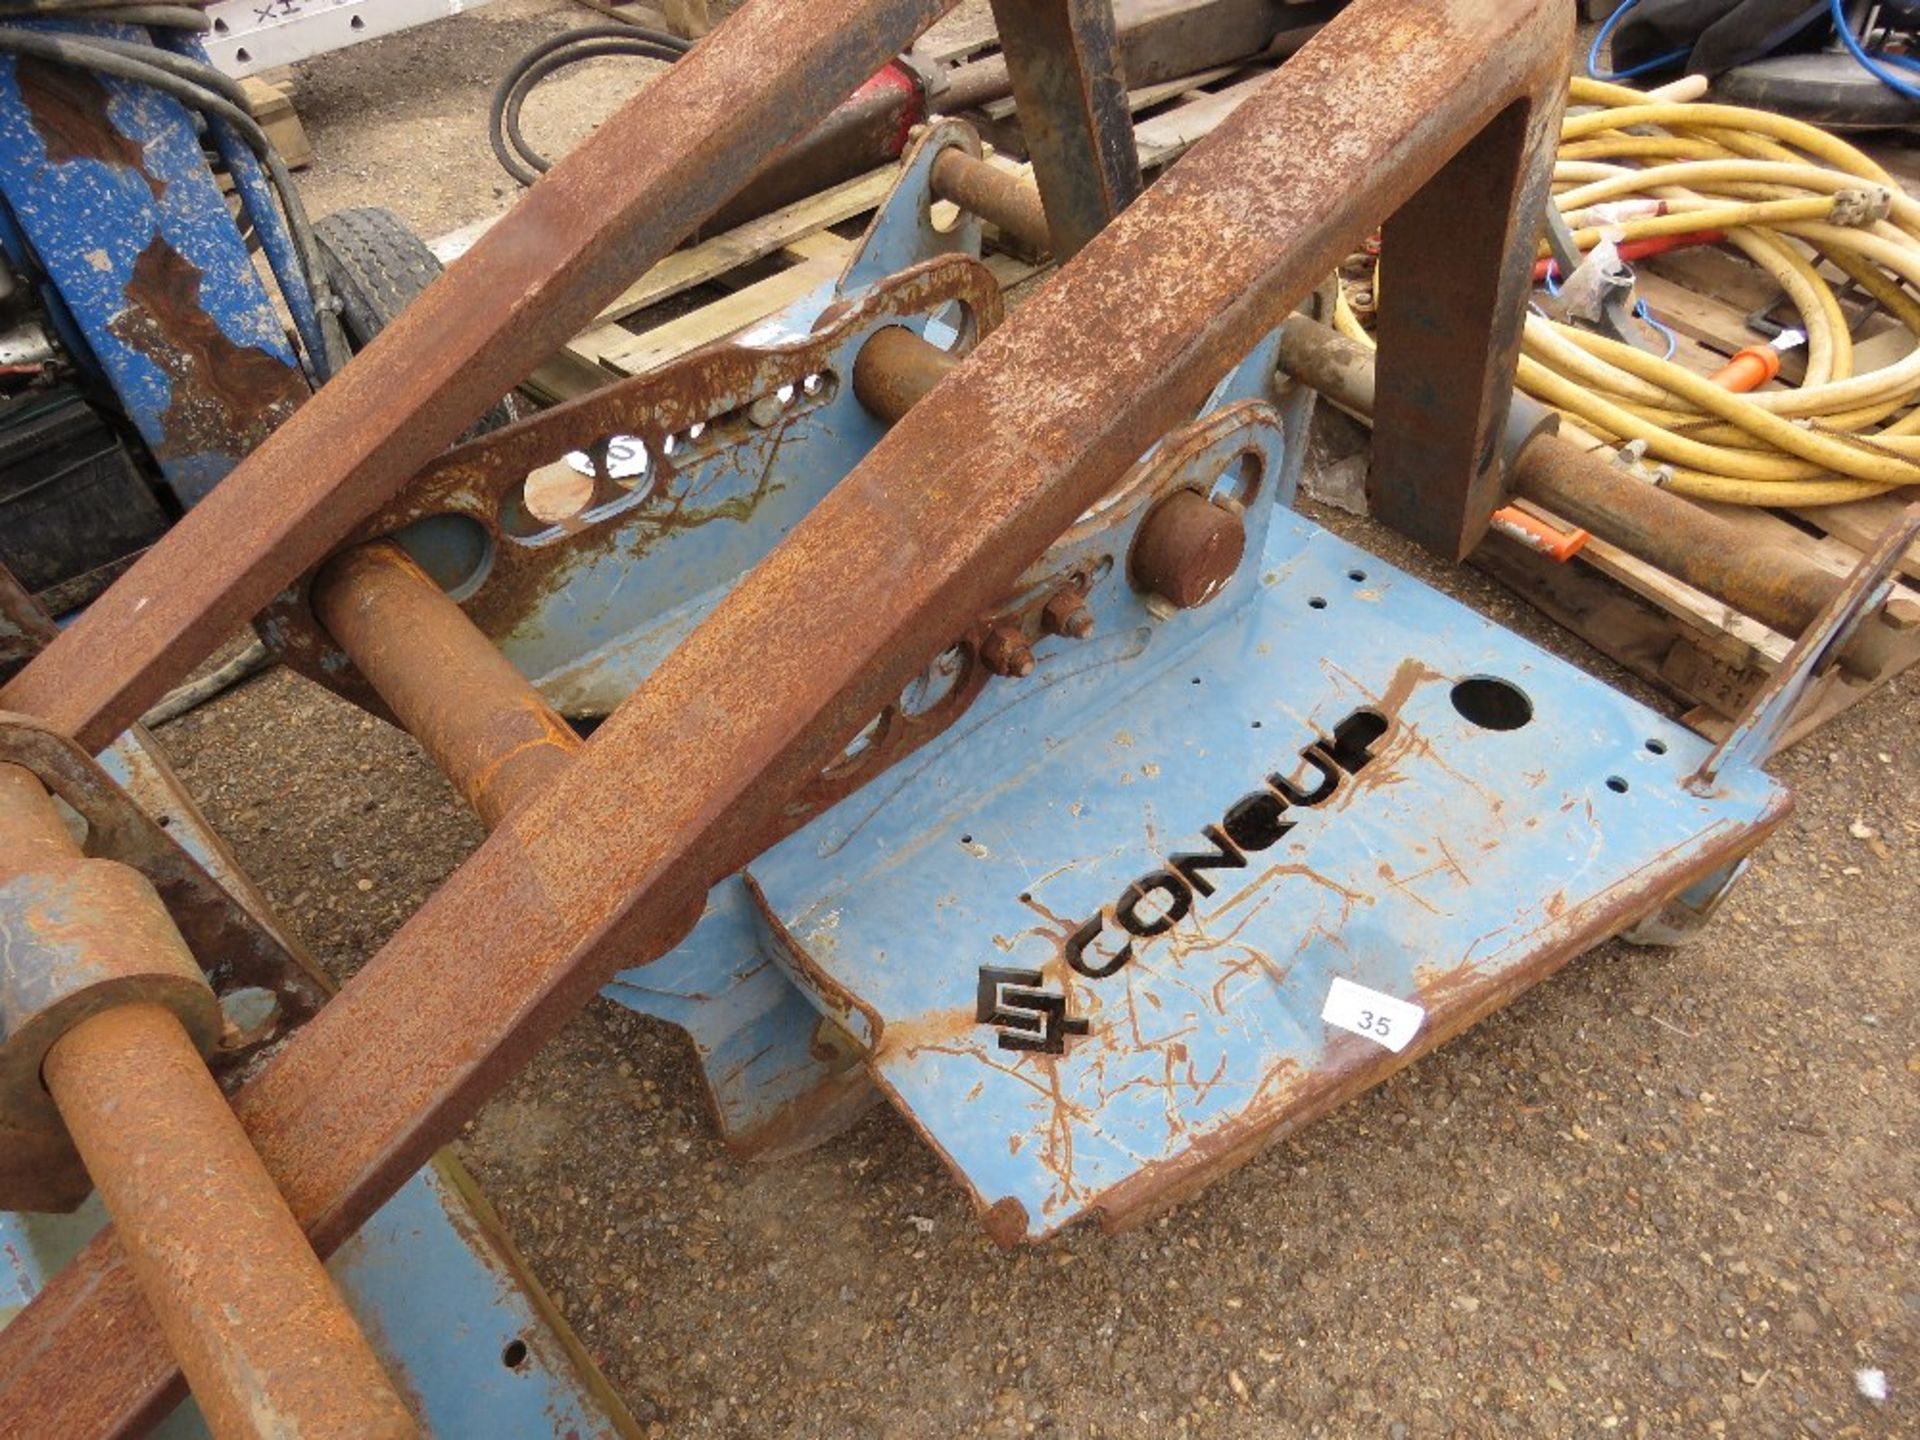 SET OF CONQUIP EXCAVATOR MOUNTED PALLET FORKS. SOURCED FROM COMPANY LIQUIDATION.